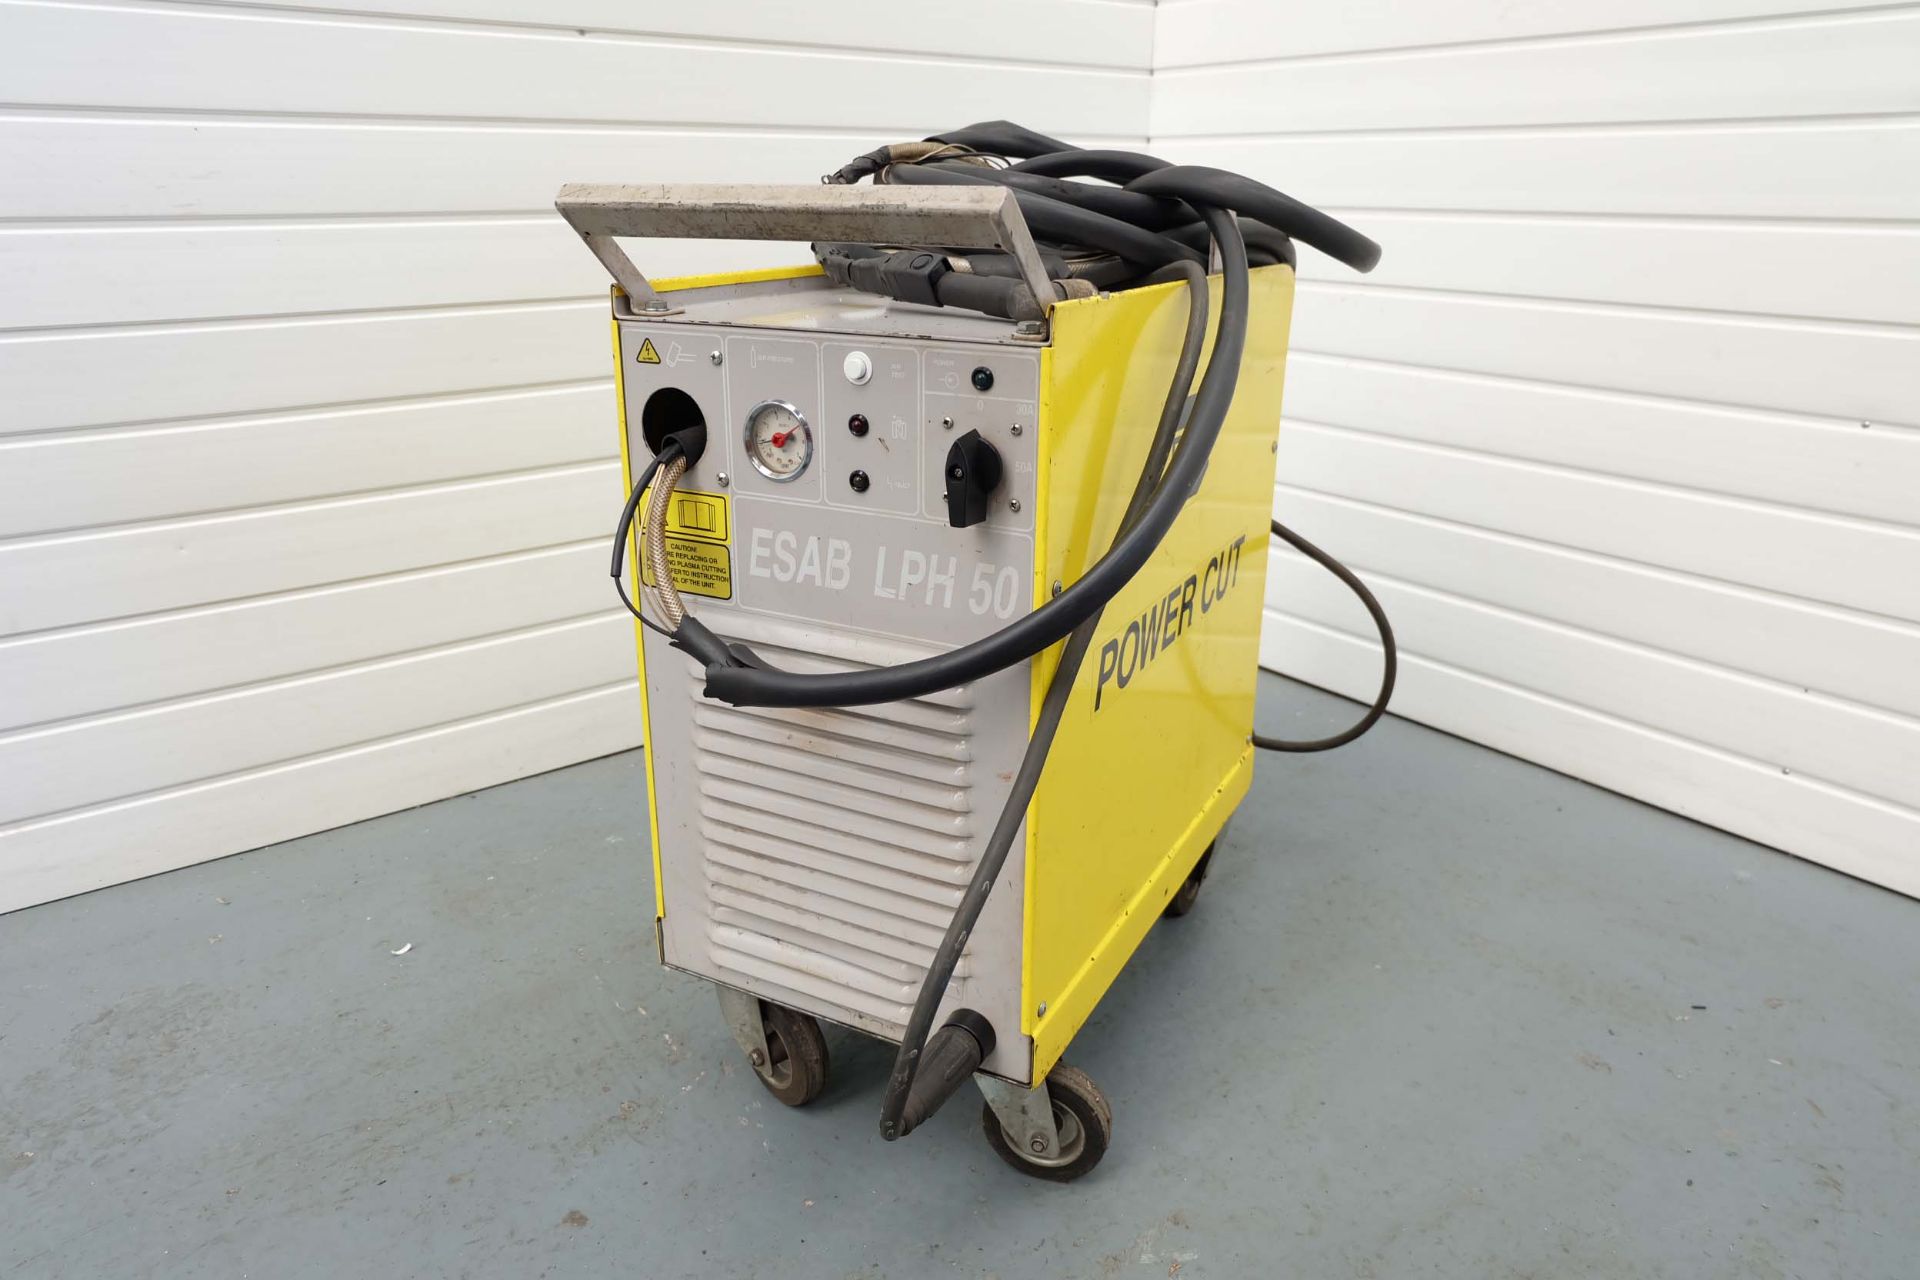 ESAB LPH 50 Mobile Mig Welding Set. 50 Amp @ 60% Duty Cycle. 30 Amp @ 100% Duty Cycle. - Image 2 of 6